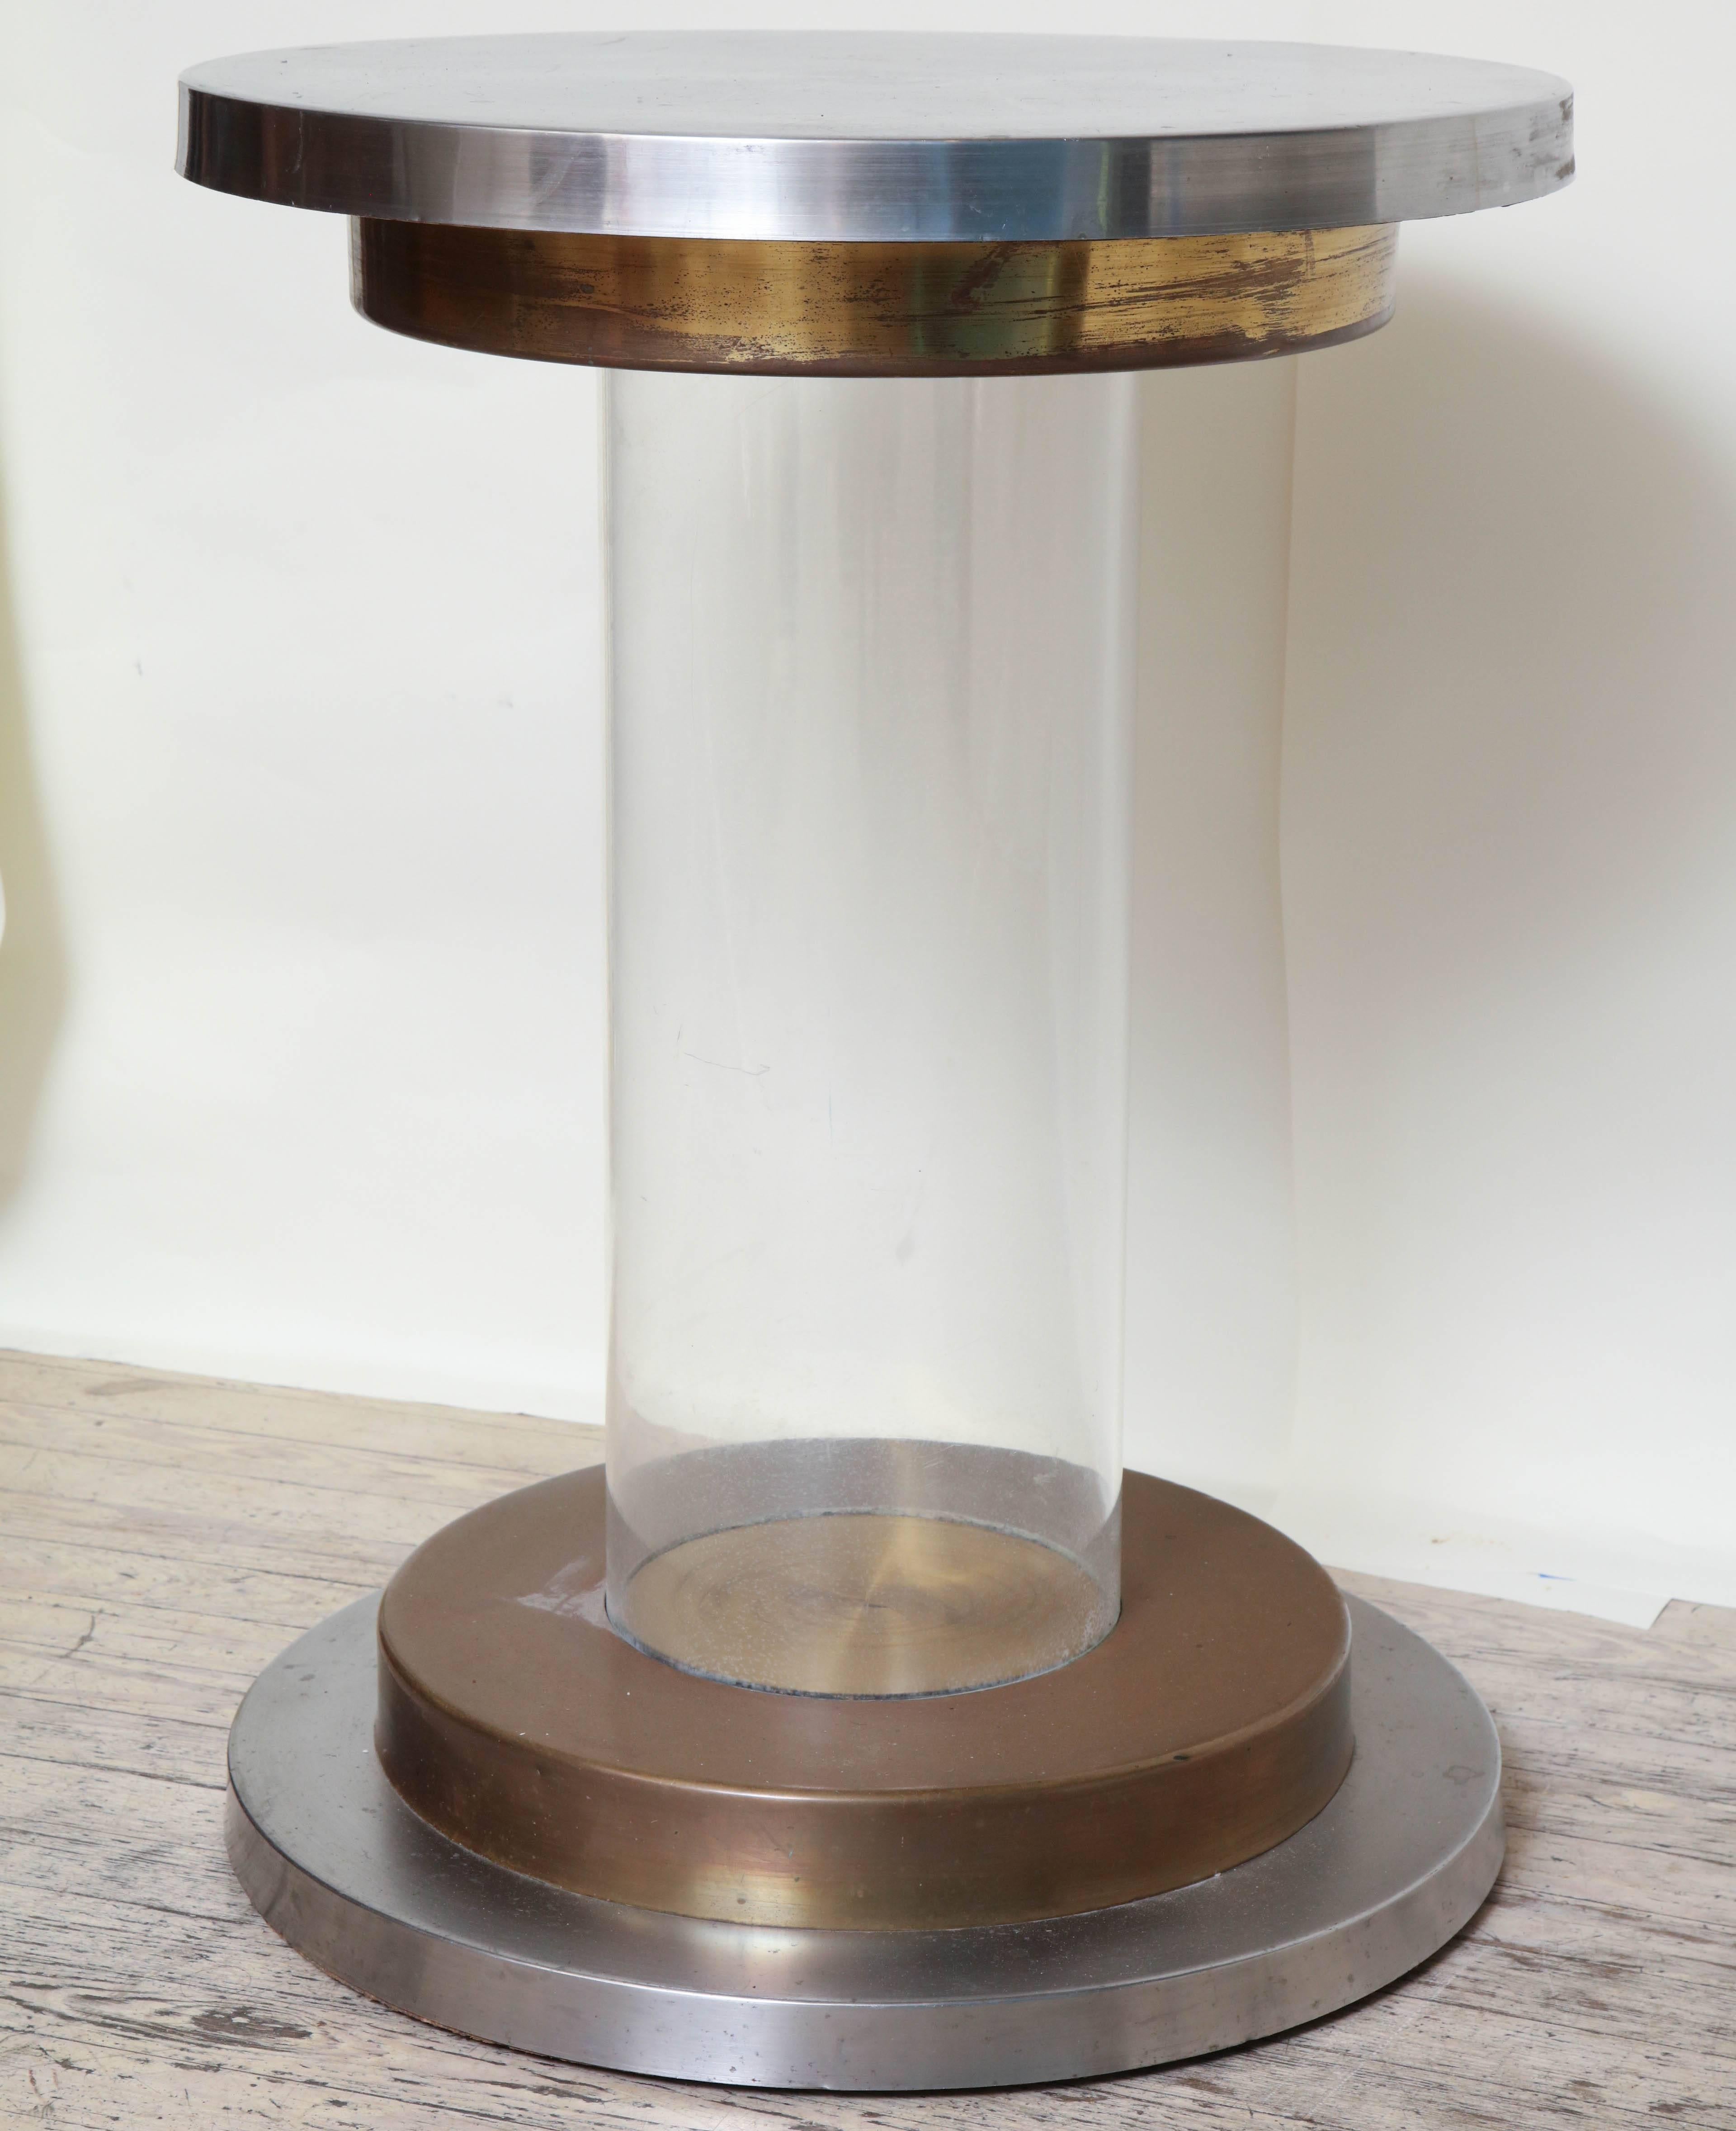 Architectural Mid-Century Modern end table Lucite aluminum and brass, 1970s.